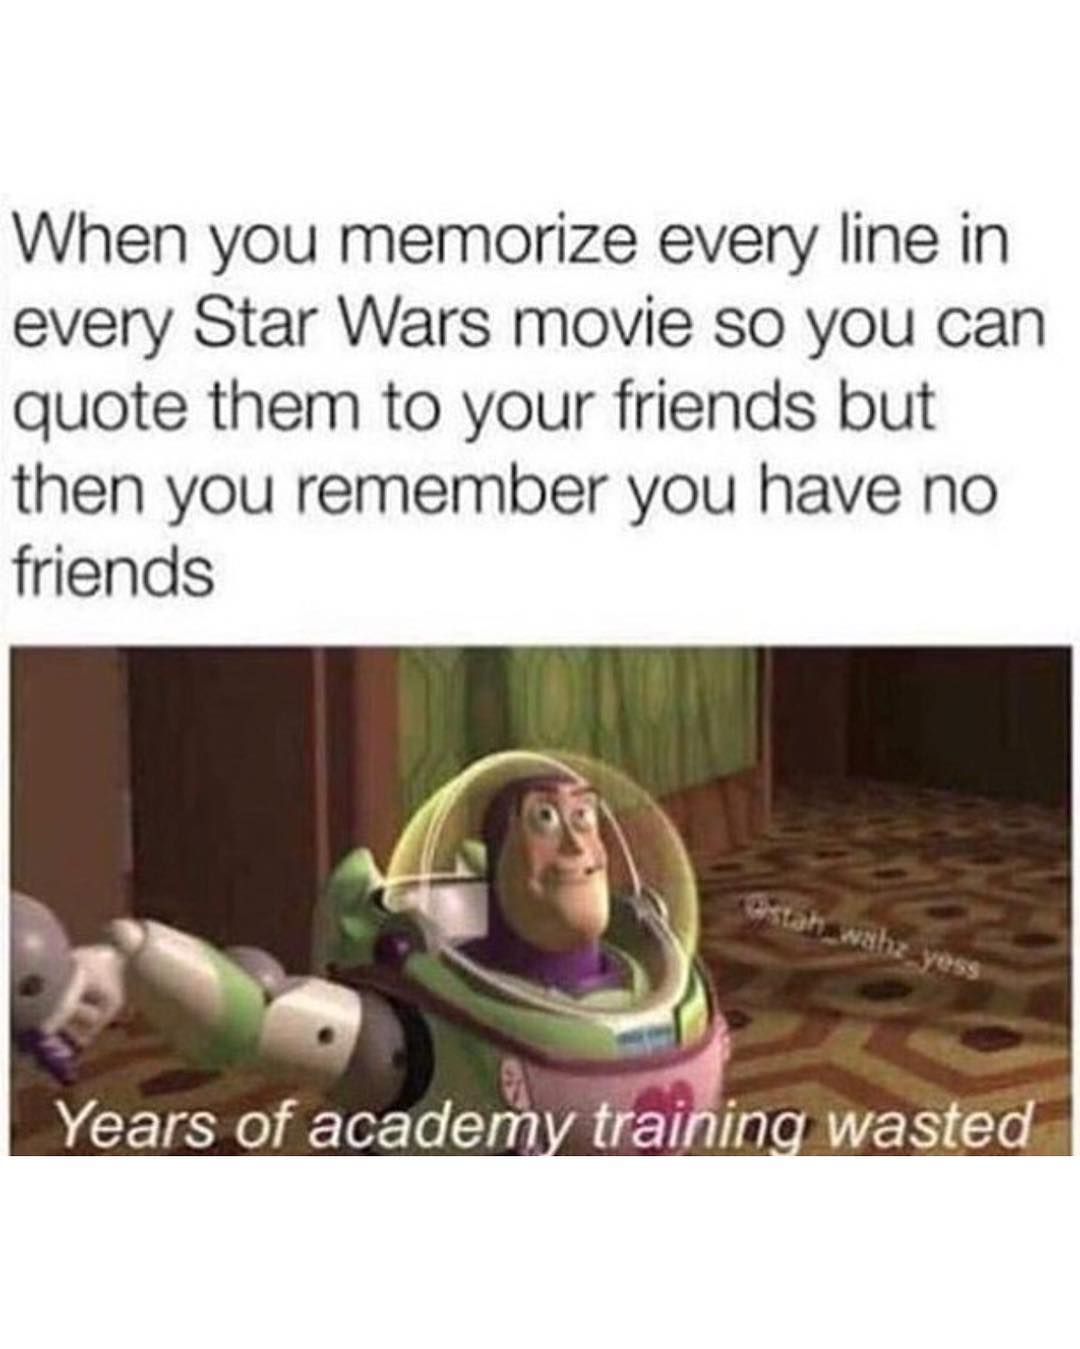 nothing like the simulations